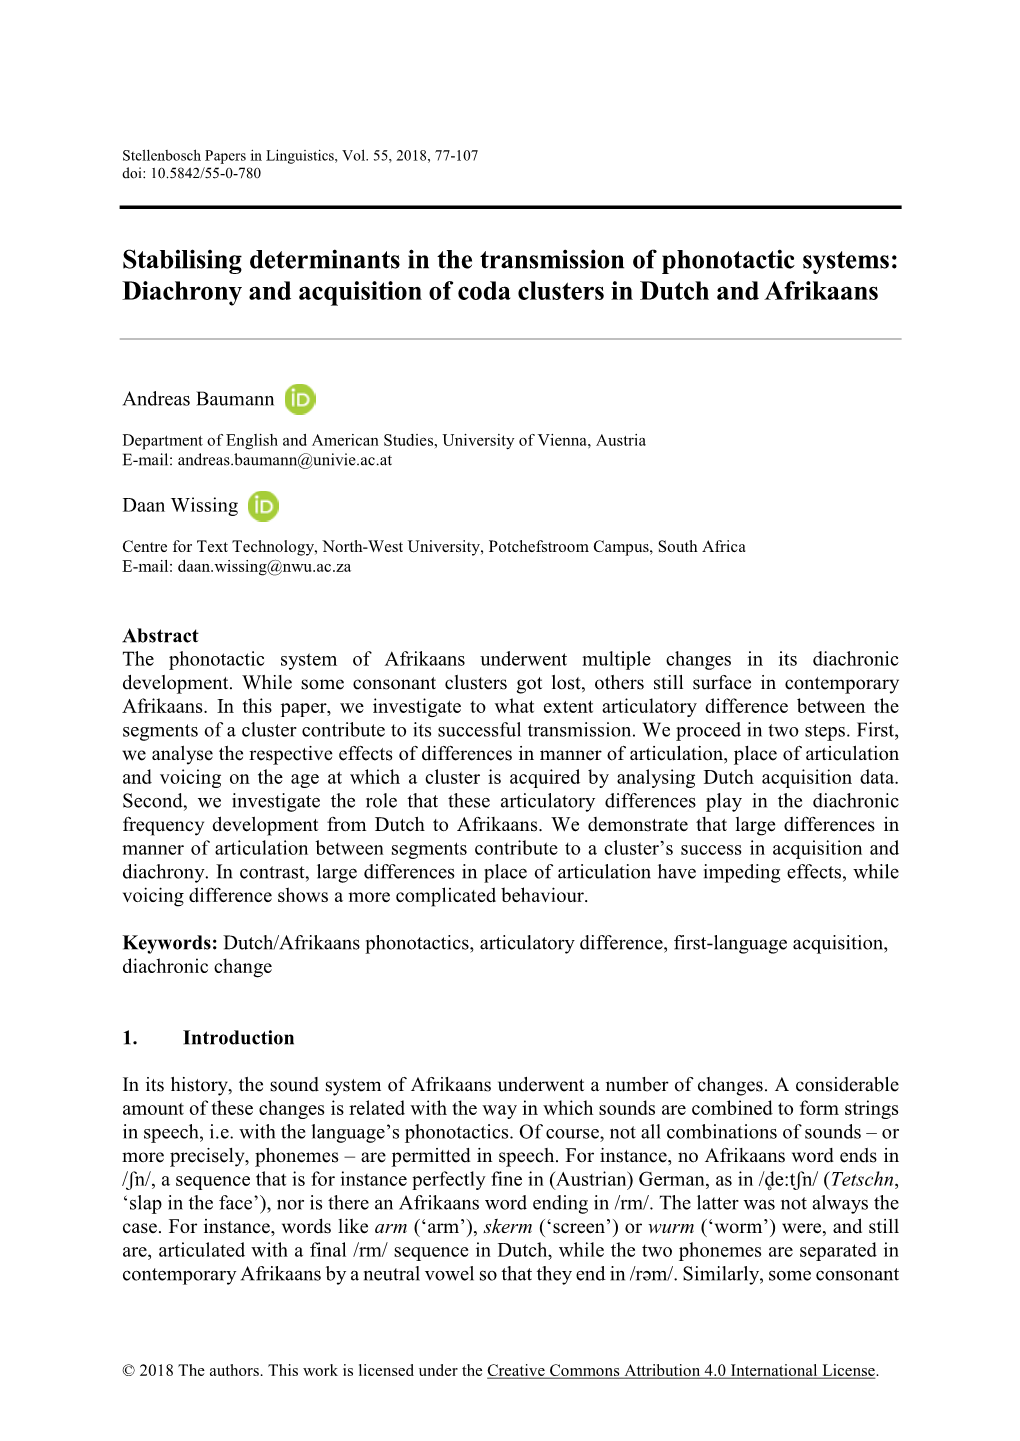 Stabilising Determinants in the Transmission of Phonotactic Systems: Diachrony and Acquisition of Coda Clusters in Dutch and Afrikaans